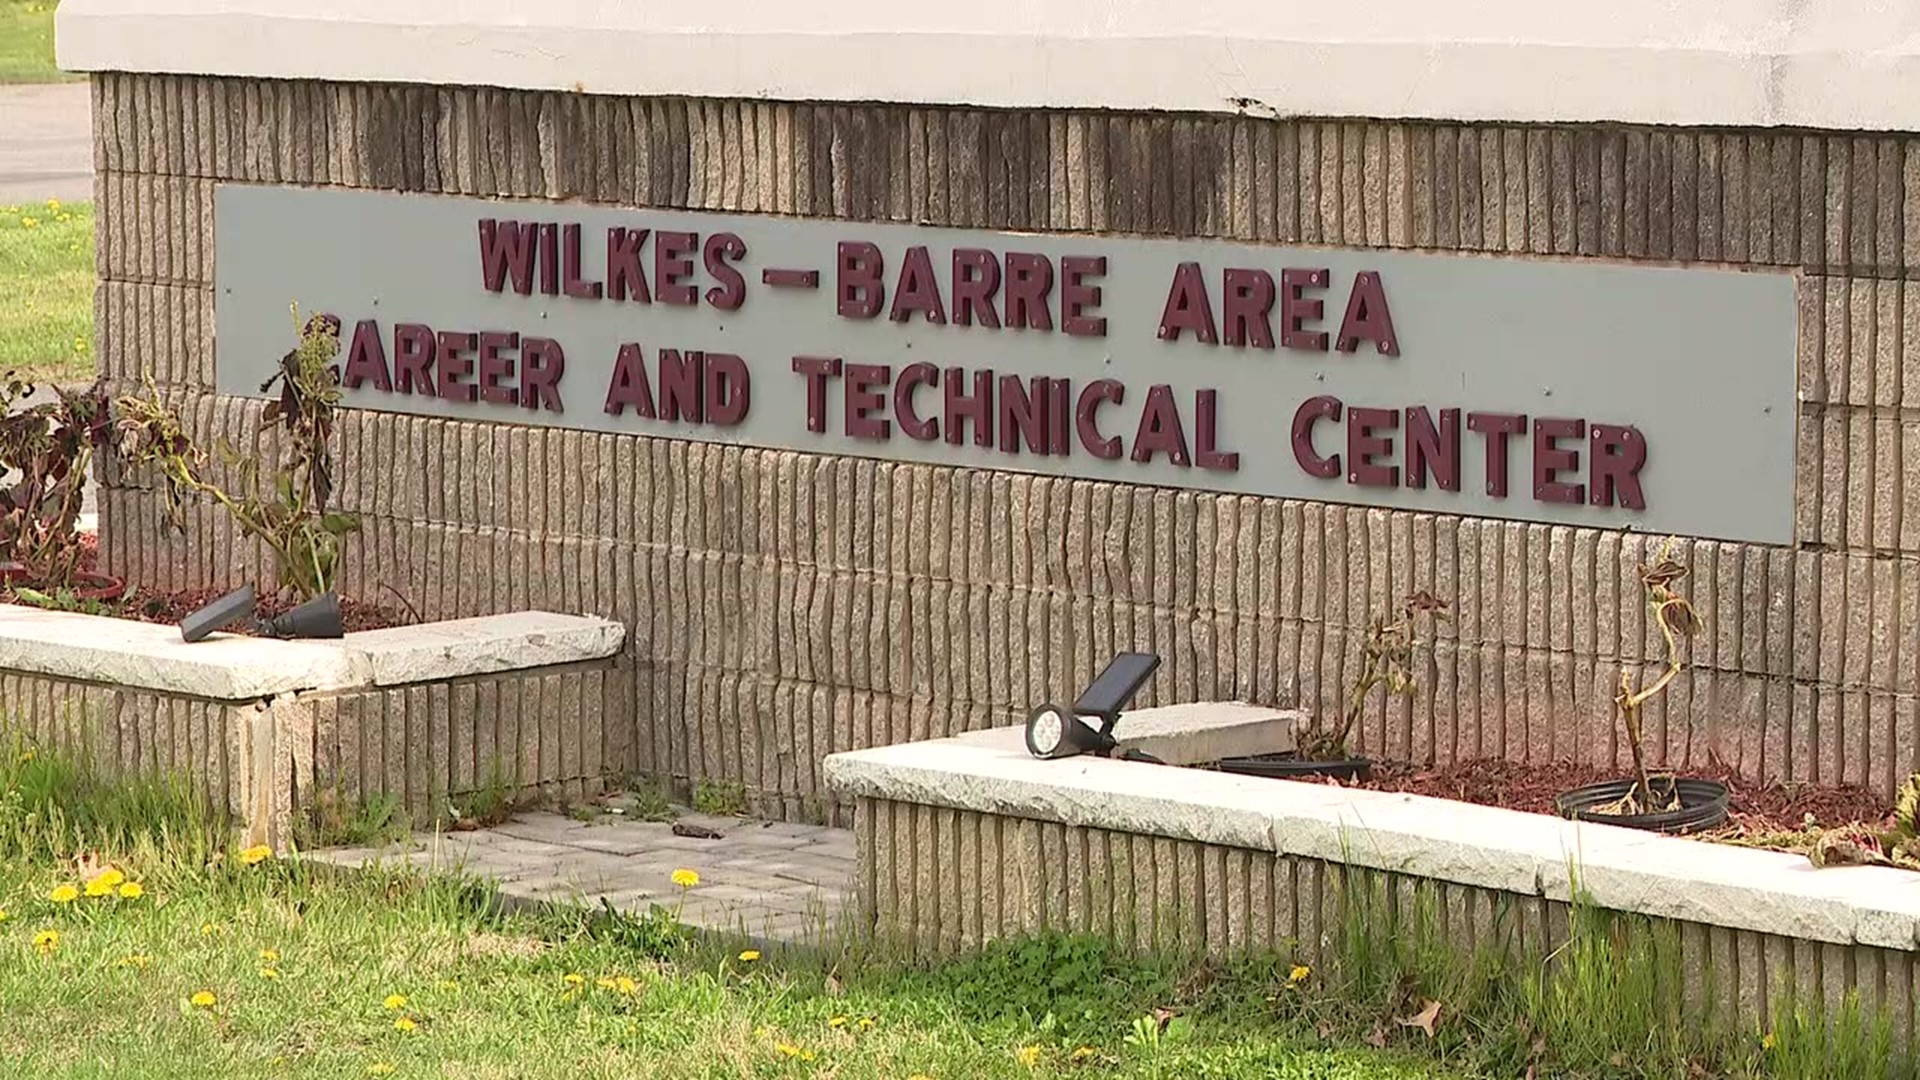 Students at the Wilkes-Barre Area CTC were dismissed after being locked down Wednesday morning.